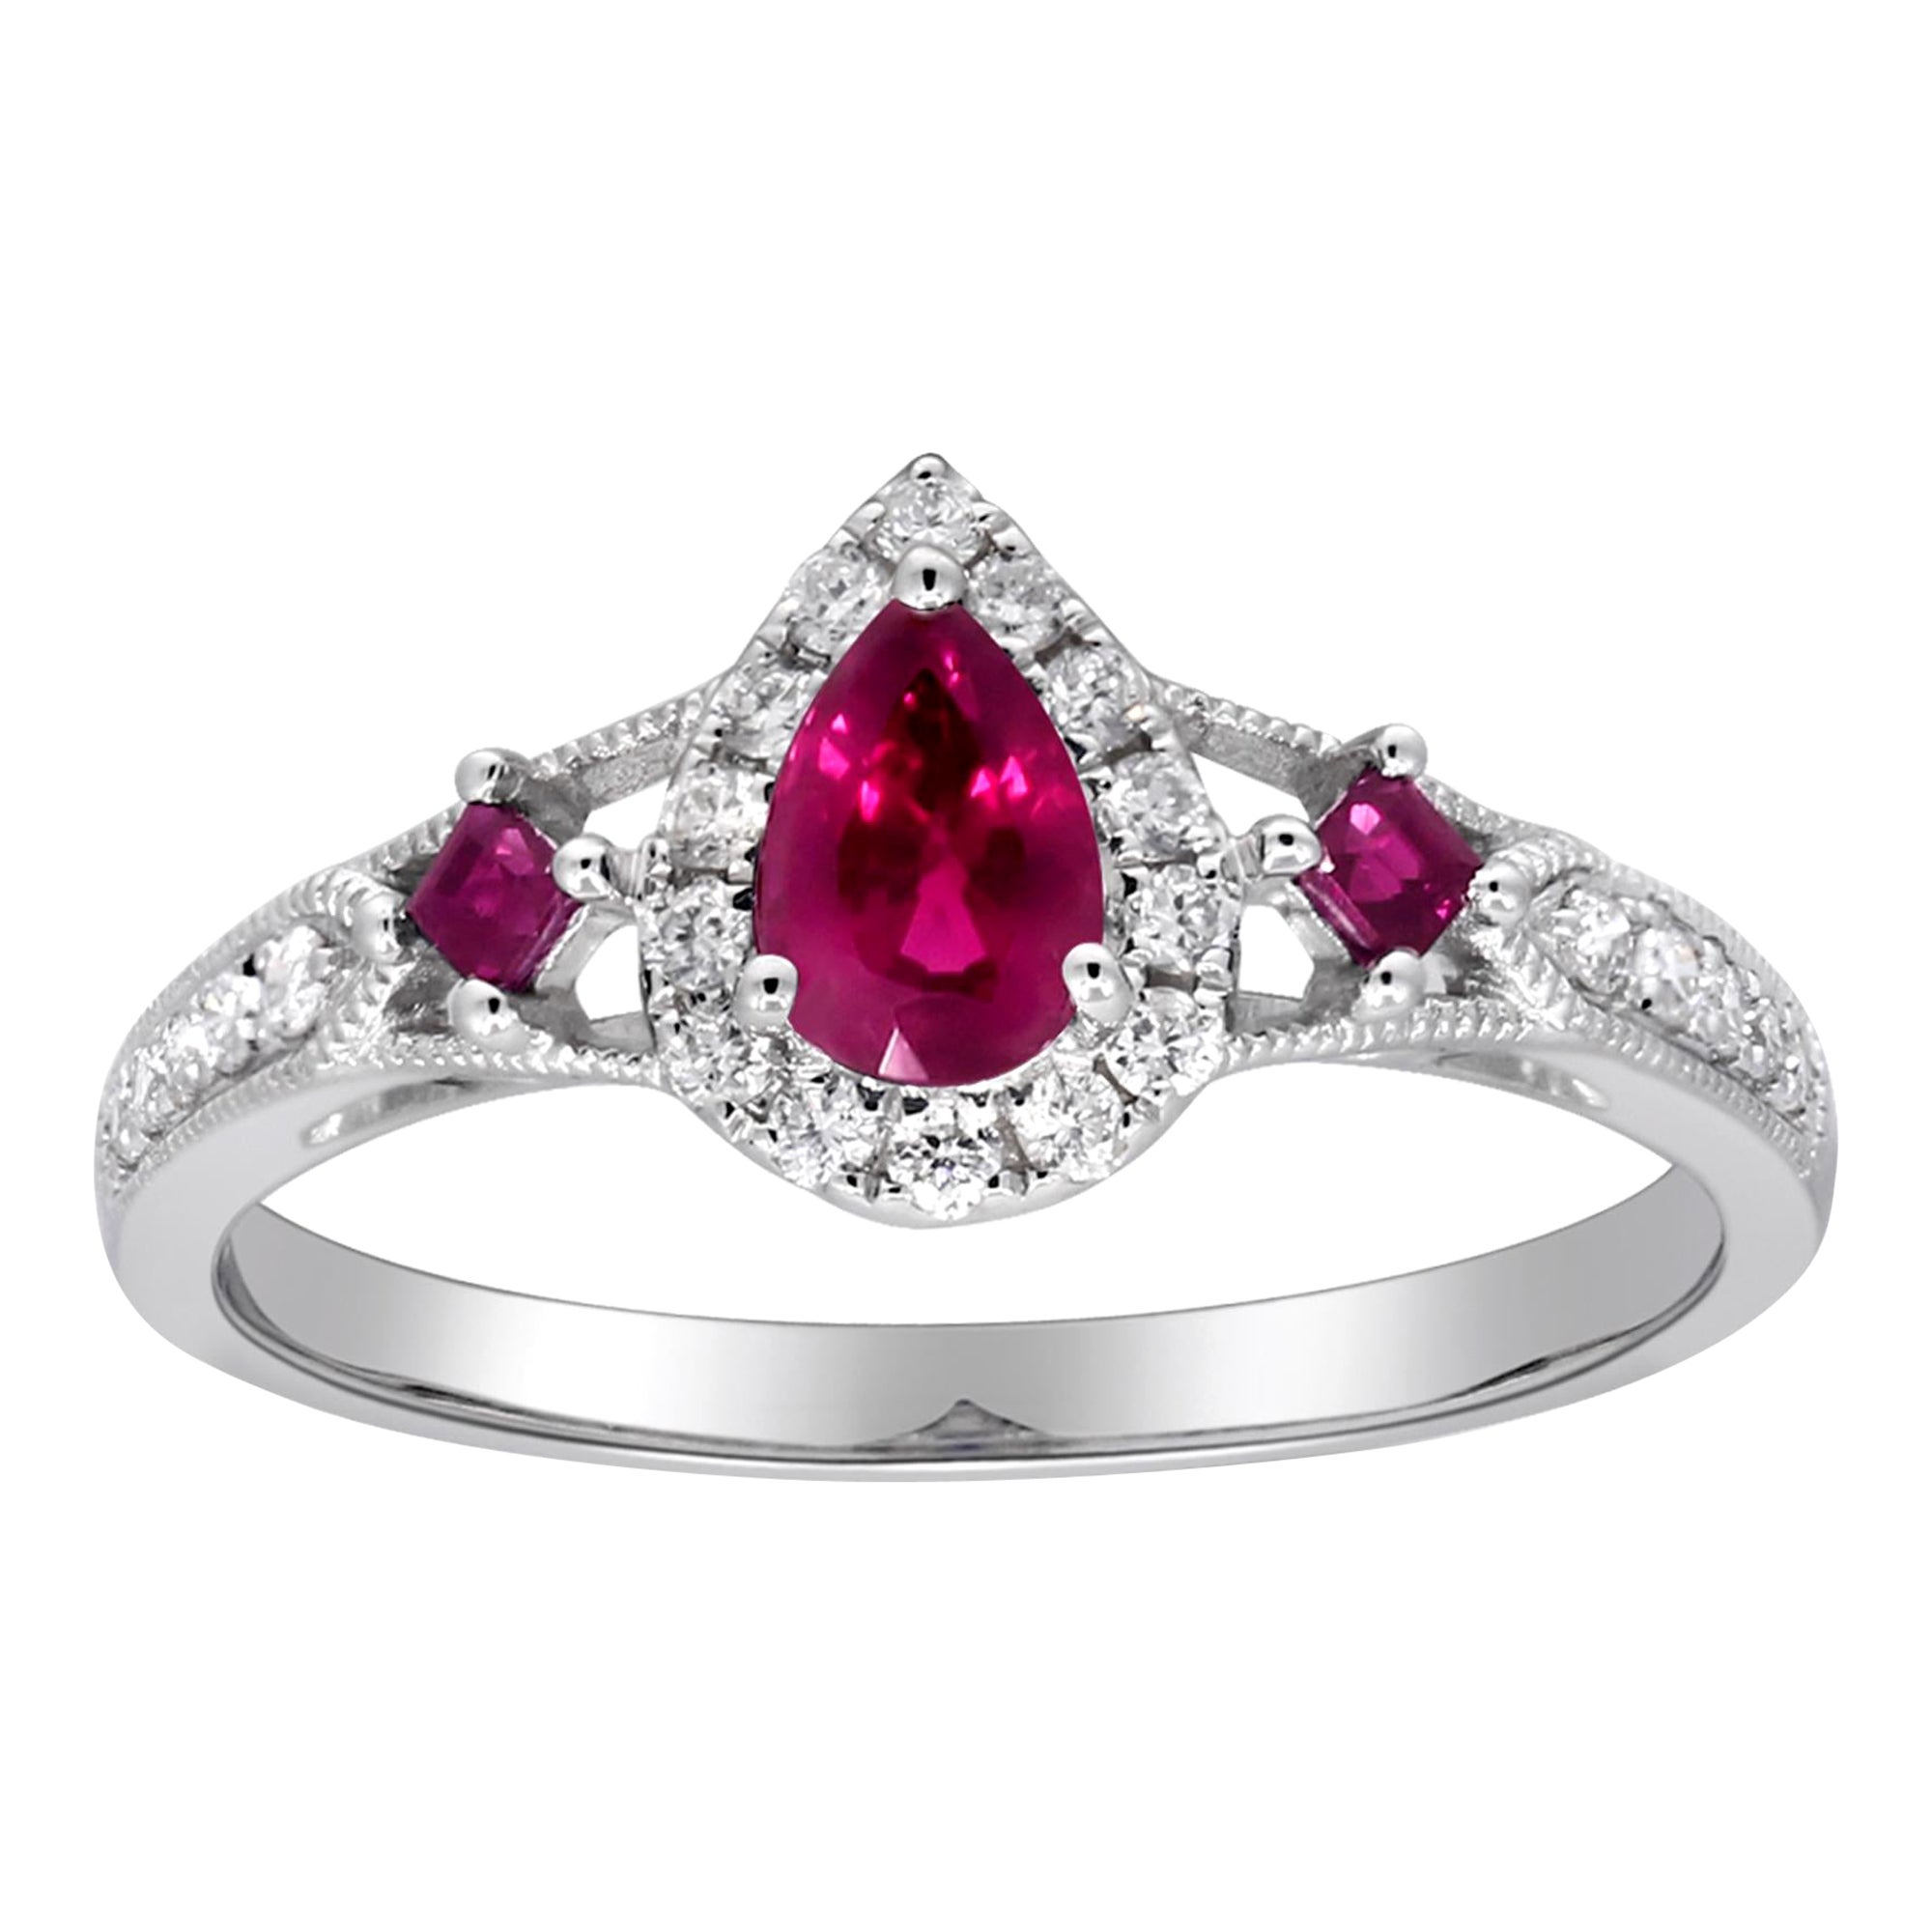 0.50 Carat Pear and 0.13 Carat Square Ruby Diamond Accents 14K White Gold Ring For Sale